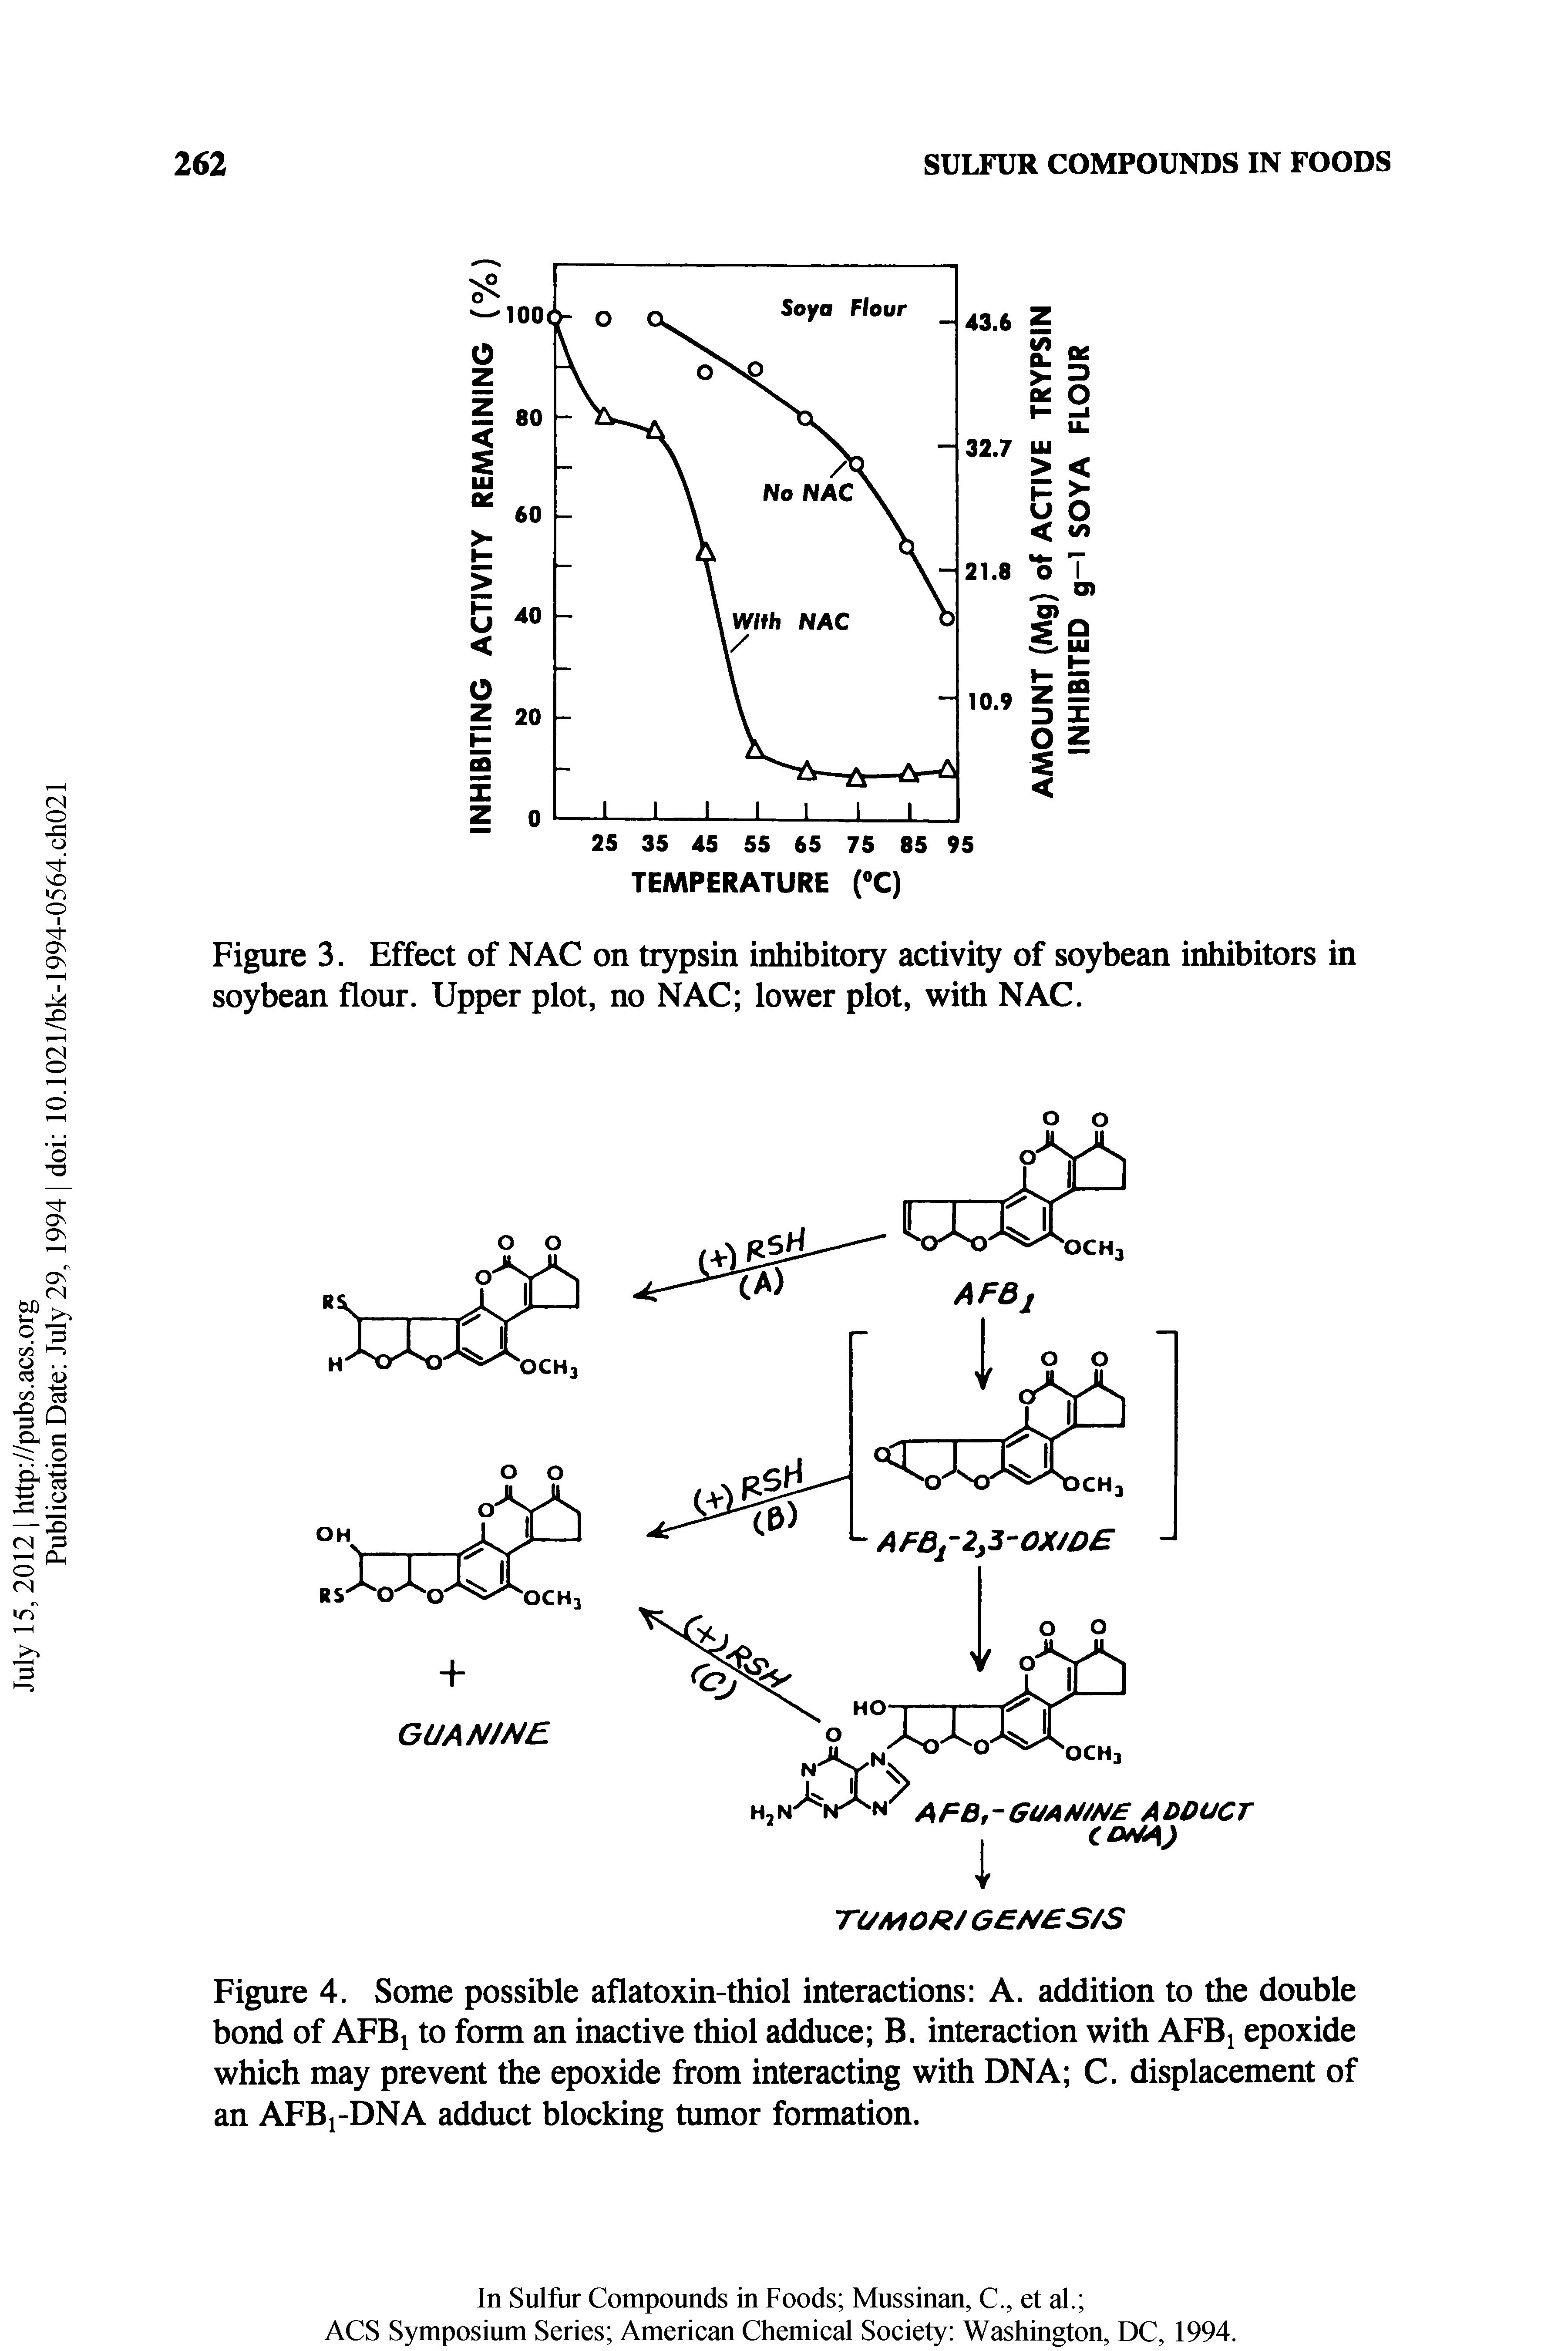 Figure 4. Some possible aflatoxin-thiol interactions A. addition to the double bond of AFBi to form an inactive thiol adduce B. interaction with AFBi epoxide which may prevent the epoxide from interacting with DNA C. displacement of an AFBi-DNA adduct blocking tumor formation.